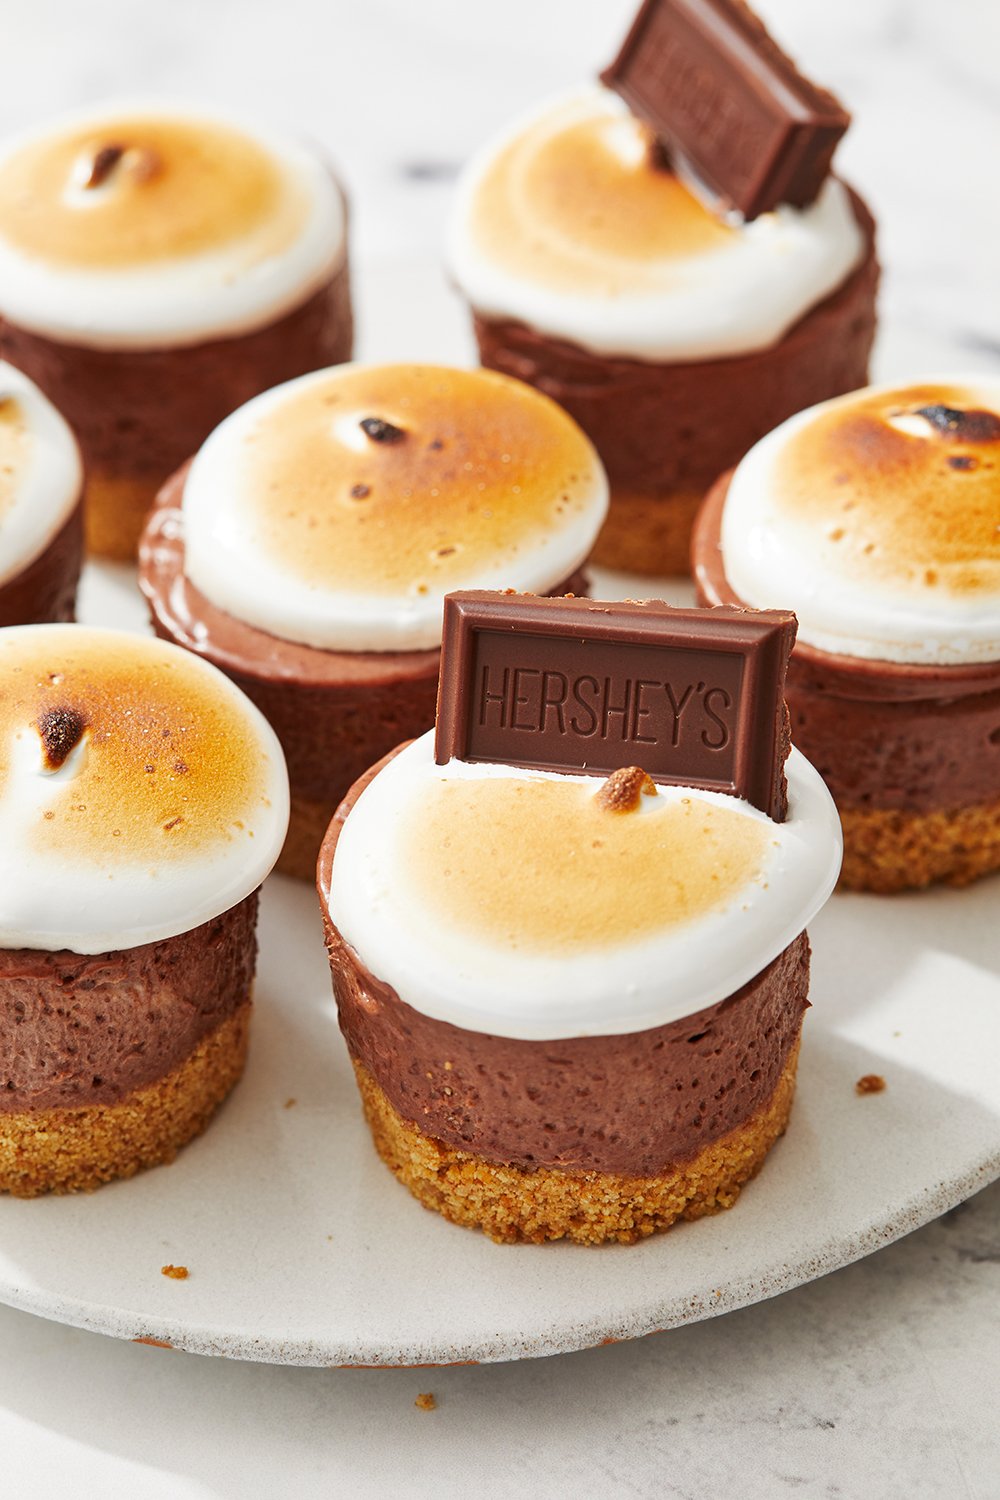 s'mores mini cheesecakes arranged on a white plate - the perfect summer dessert recipe!